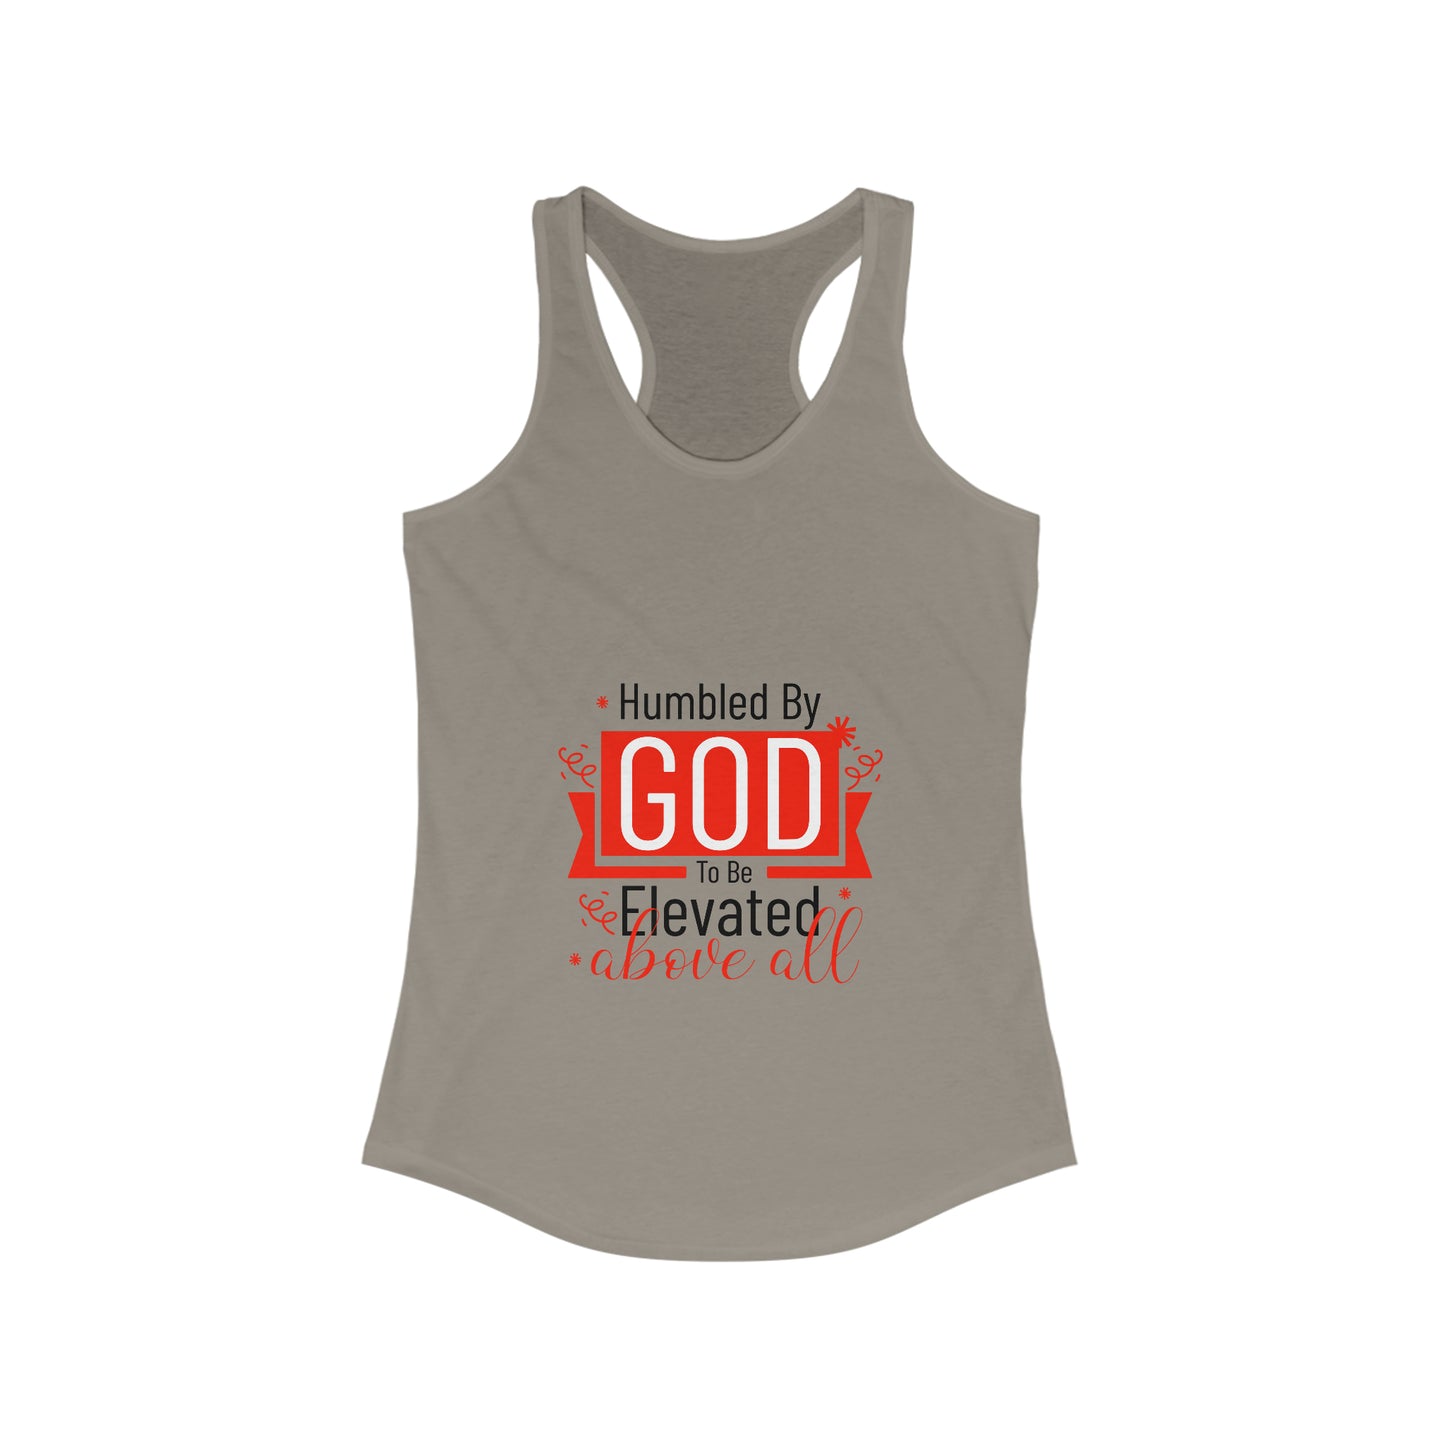 Humbled by God To Be Elevated Above All slim fit tank-top